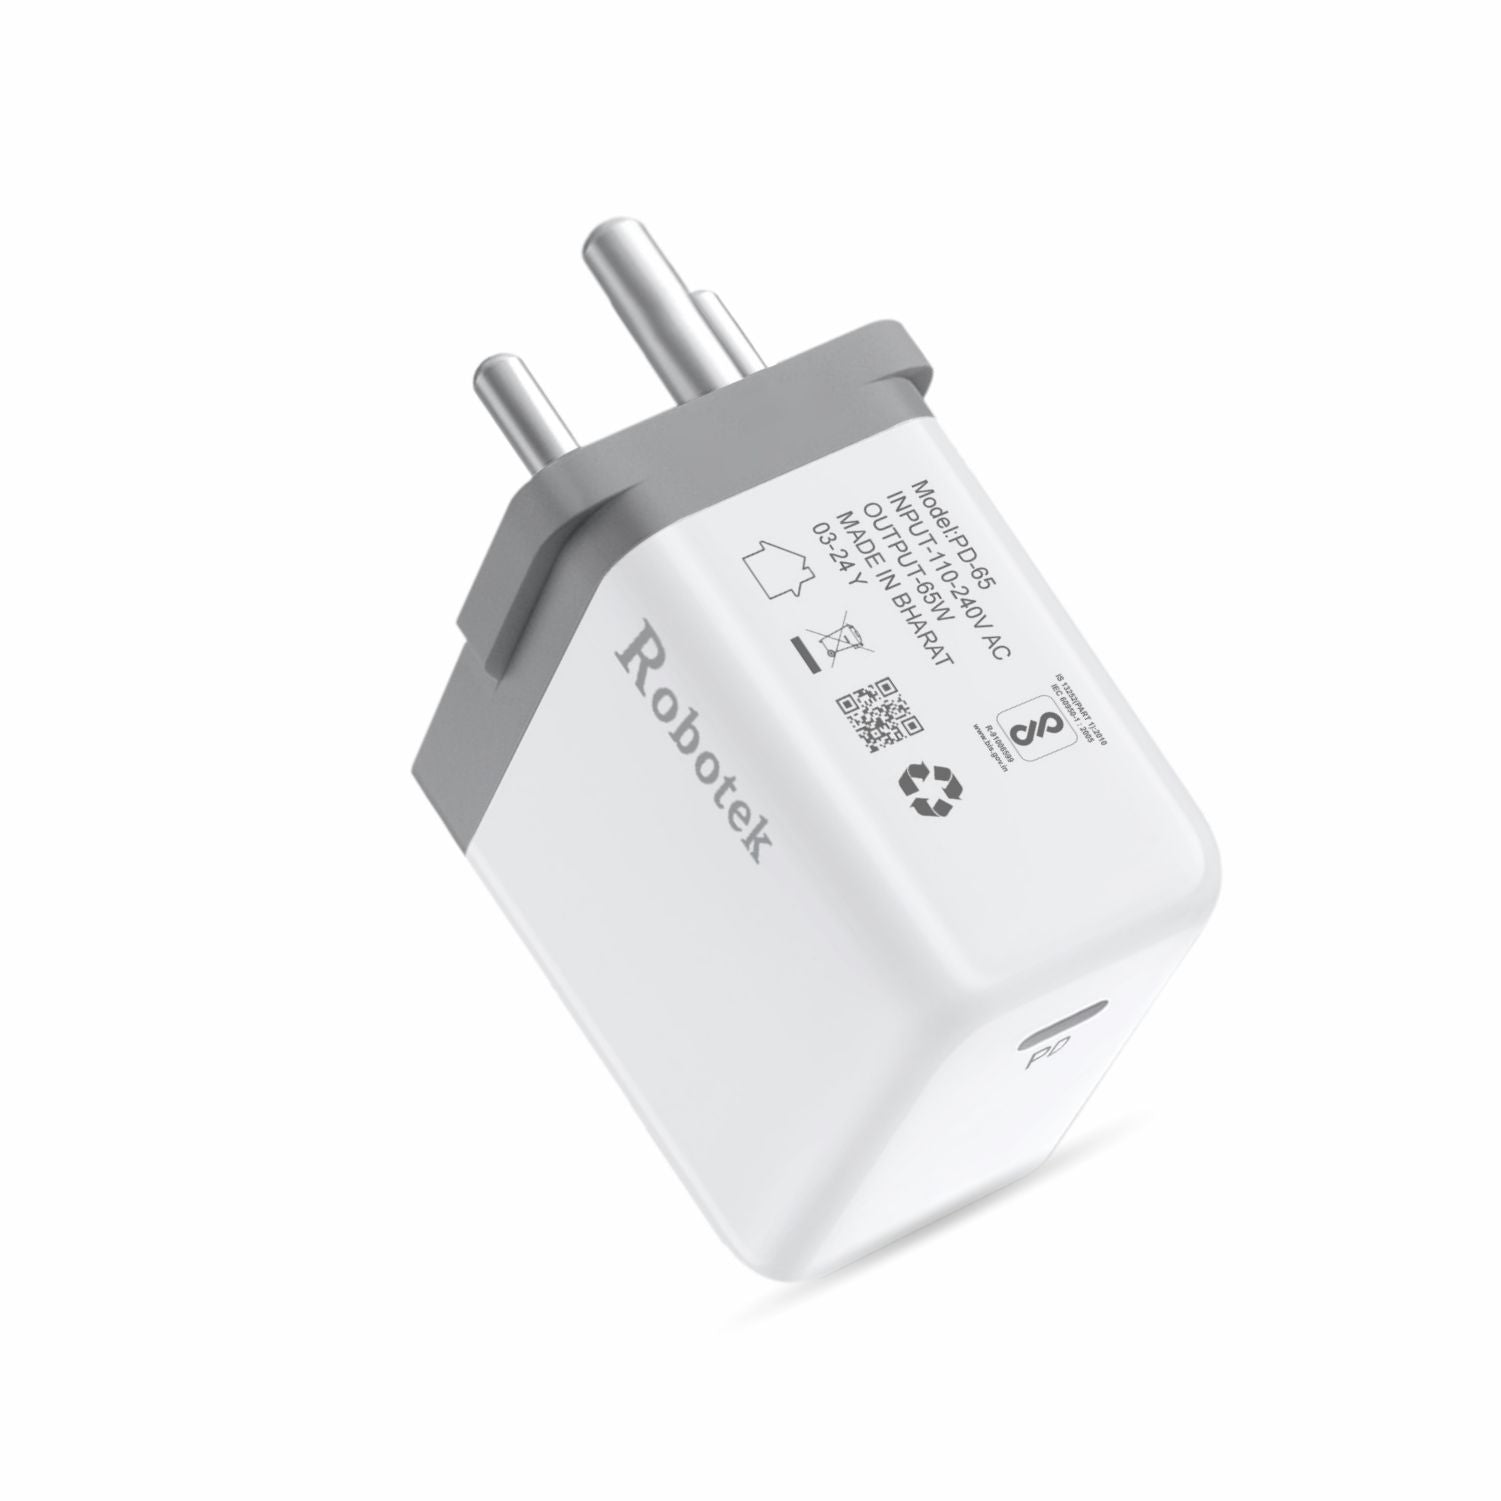 Robotek 65W PD-65 Super Fast Charging Wall Charger Adapter (In-built) IC Protection with 65Watt Super Fast Data Cable